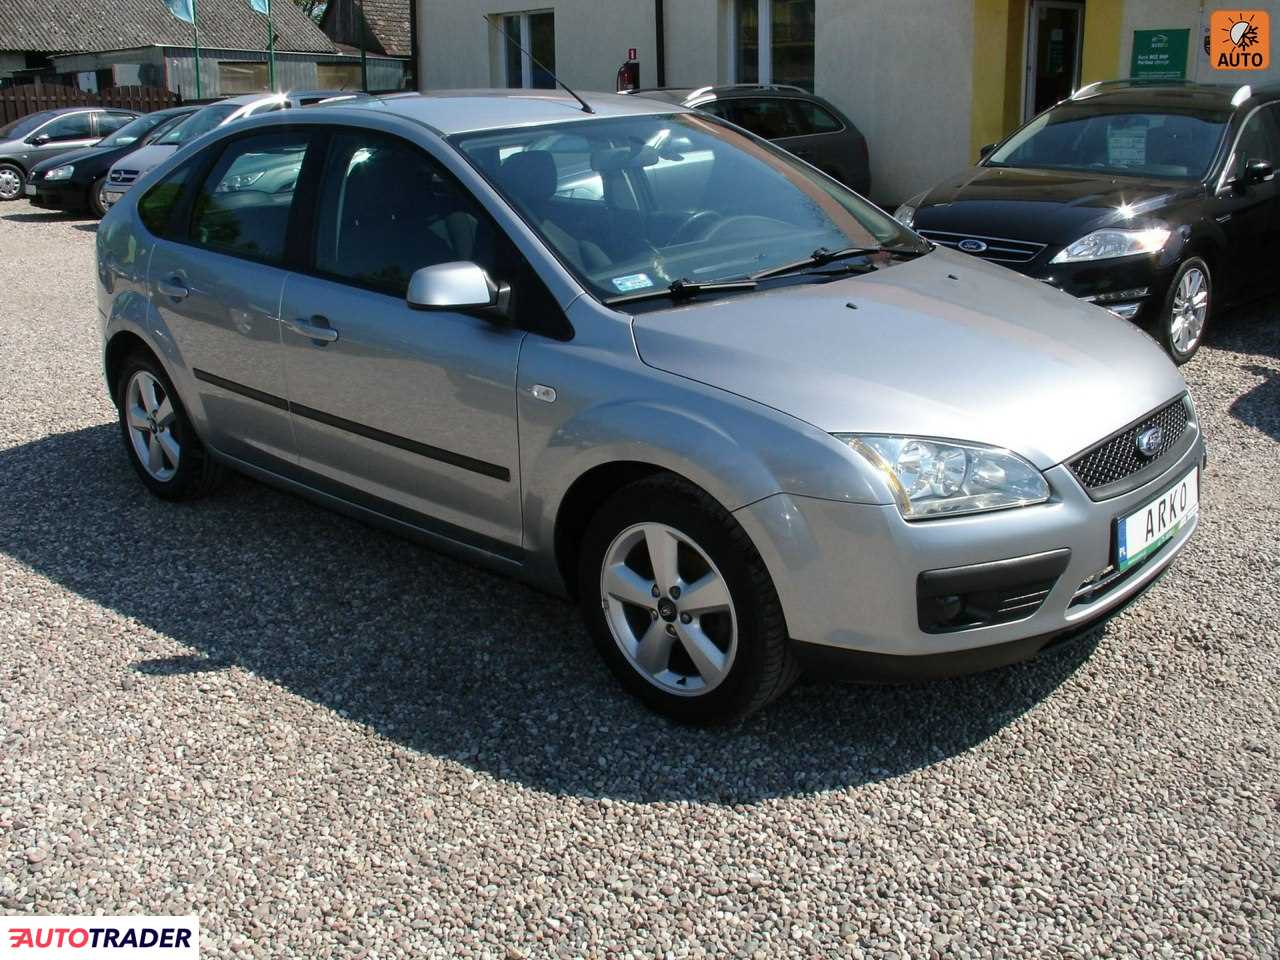 Ford Focus 2004 1.6 108 KM